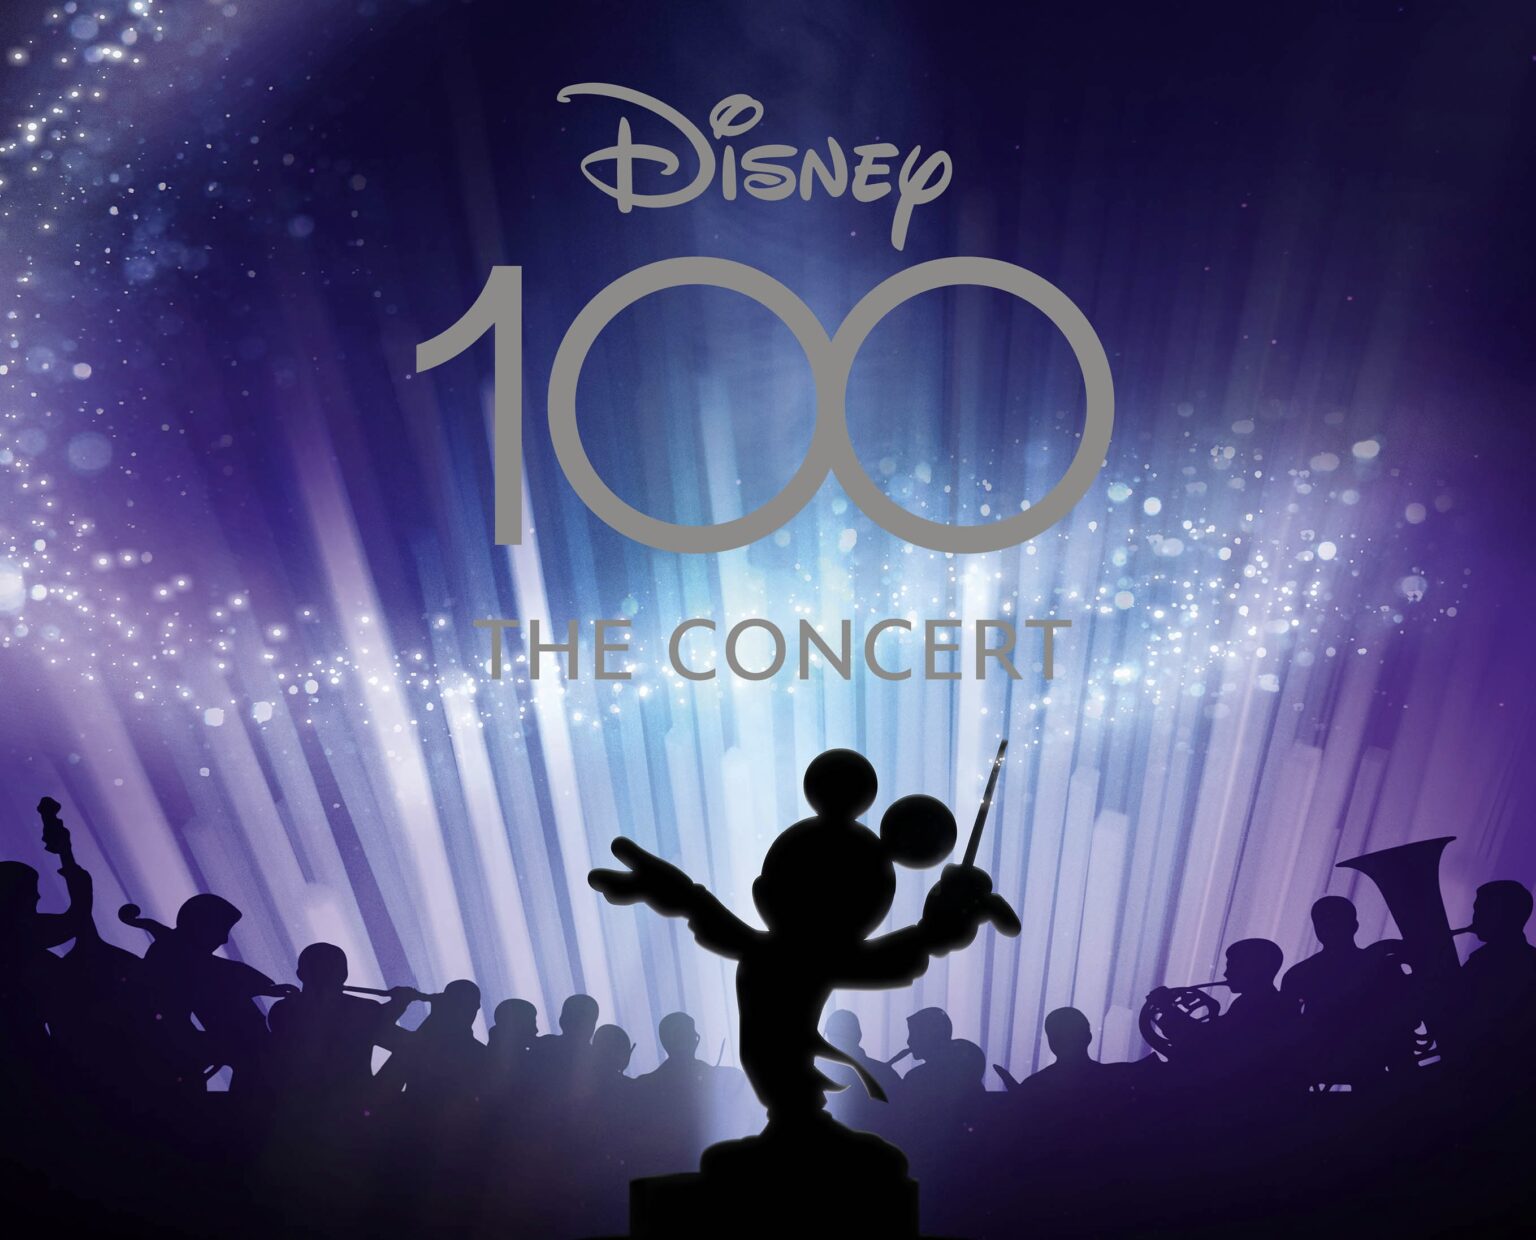 A poster for D100: The Concert, which shows a silhouette of Micky Mouse conducting an orchestra.